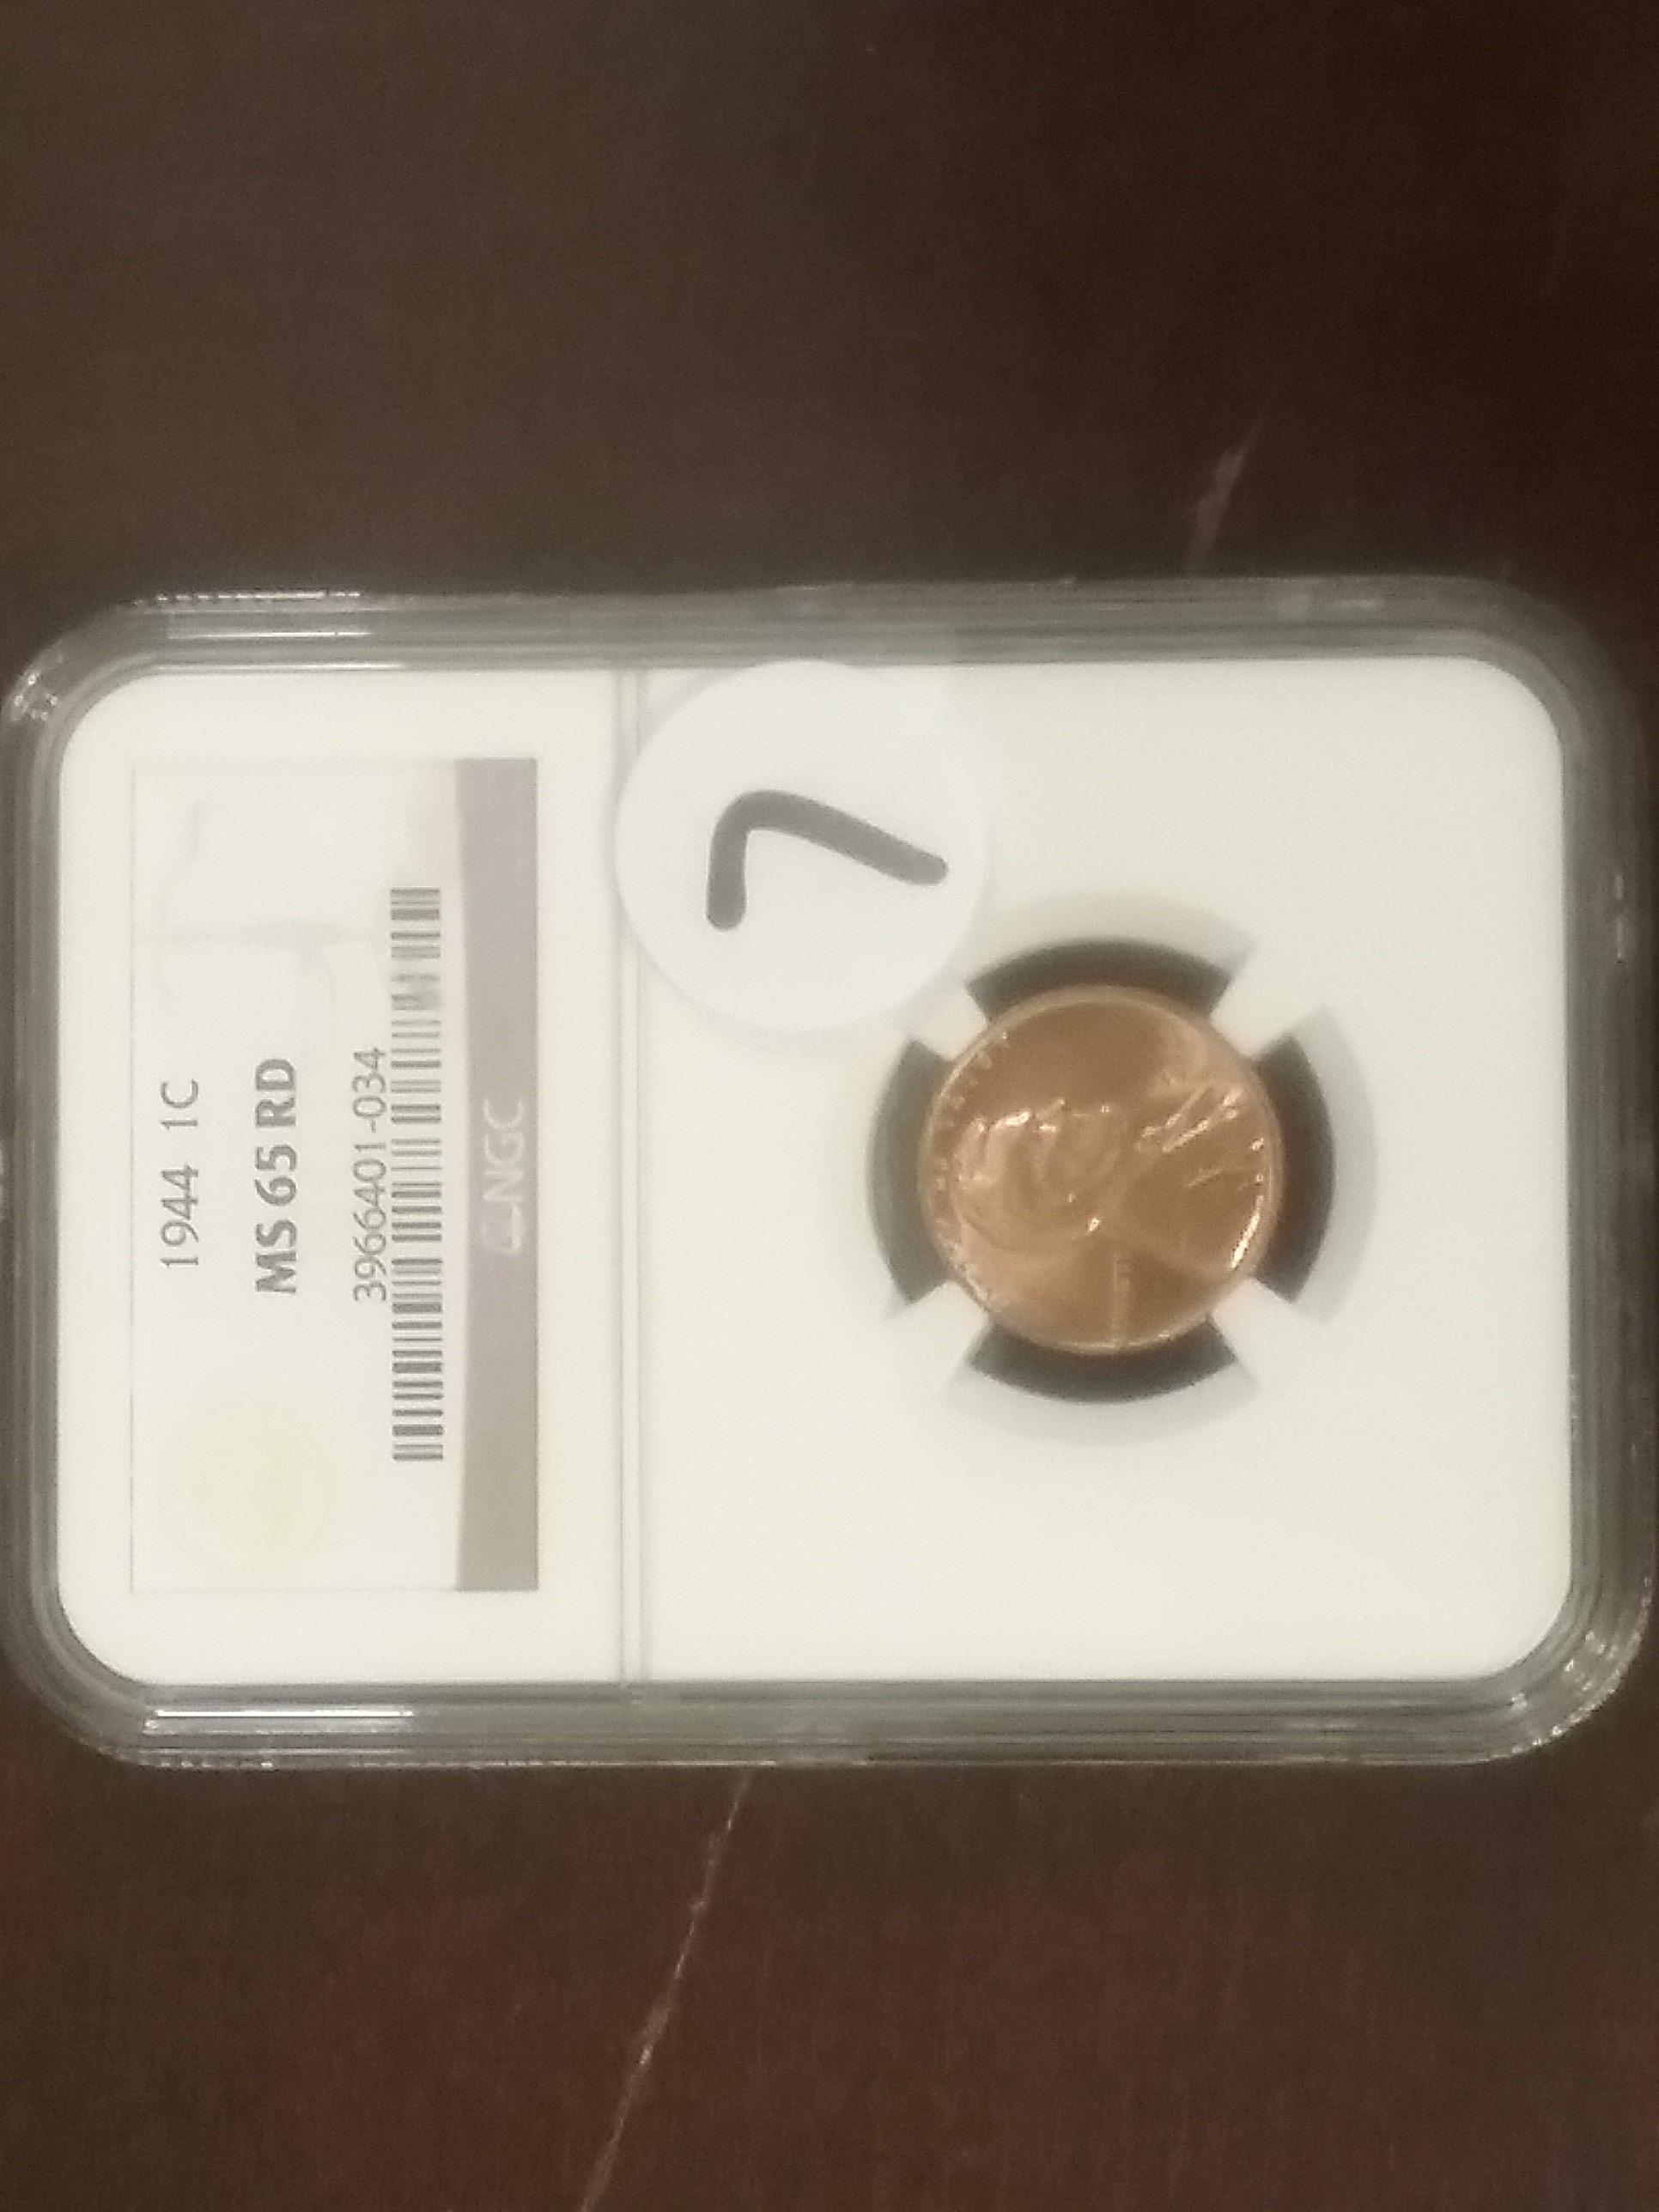 NGC 1944 MS-65 RED Wheat Cent